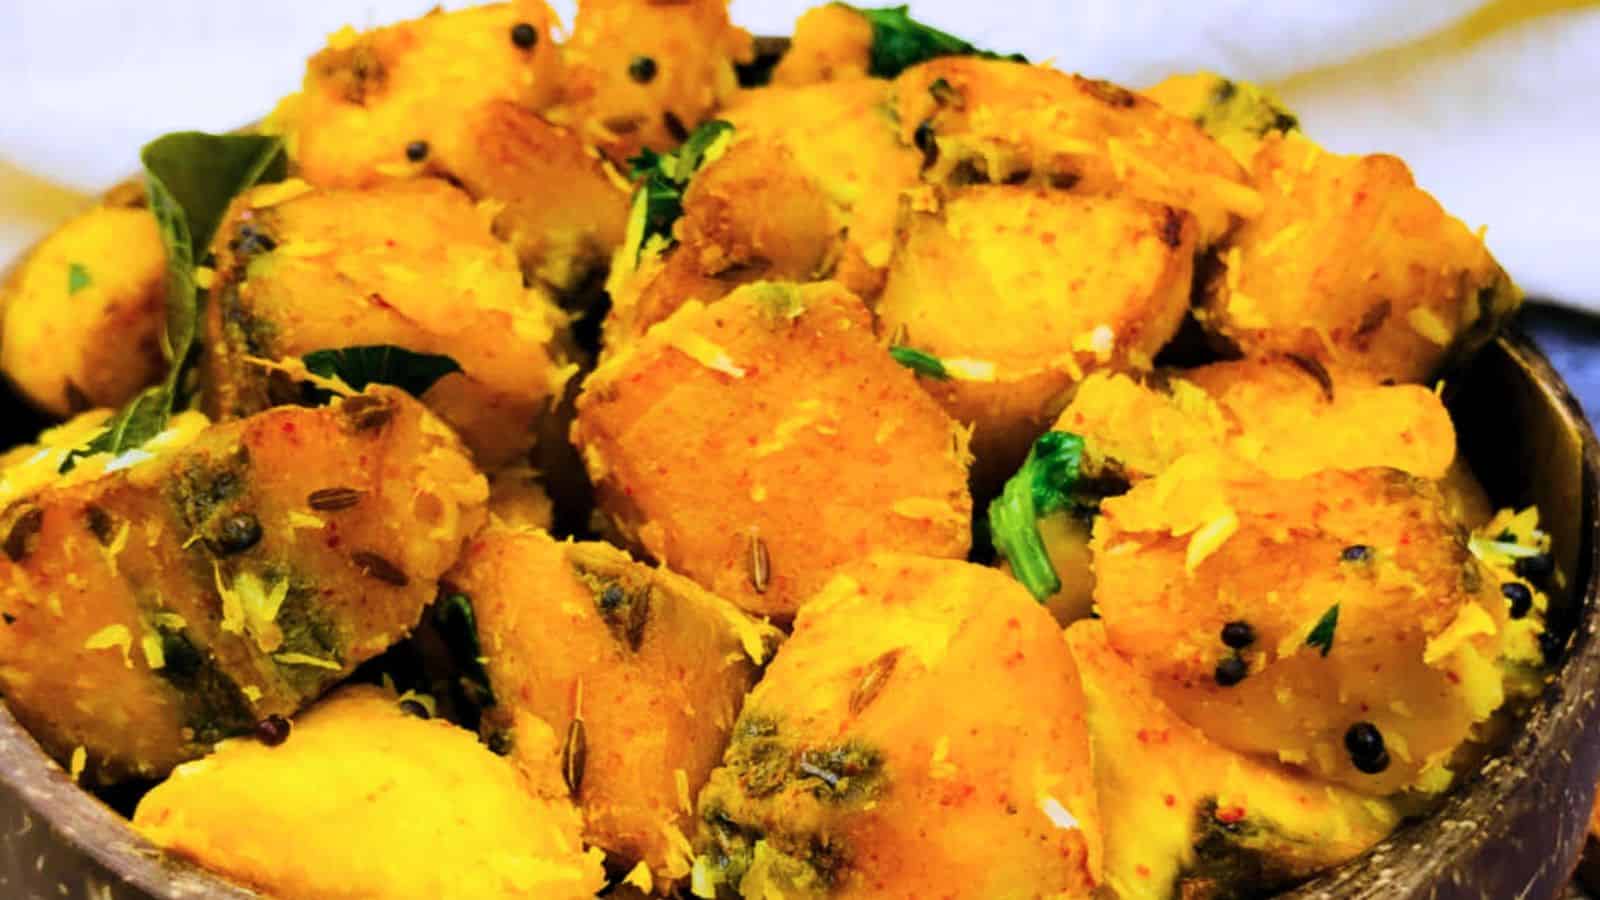 <p>It is a simple dish that brings the sweet and savory together in each slice. Fried to perfection, it's a snack that's as satisfying as it is easy to love. For those with a penchant for quick, tasty bites.<br><strong>Get the Recipe: </strong><a href="https://easyindiancookbook.com/pan-fried-plantains/?utm_source=msn&utm_medium=page&utm_campaign=msn">Pan-Fried Plantains</a></p>